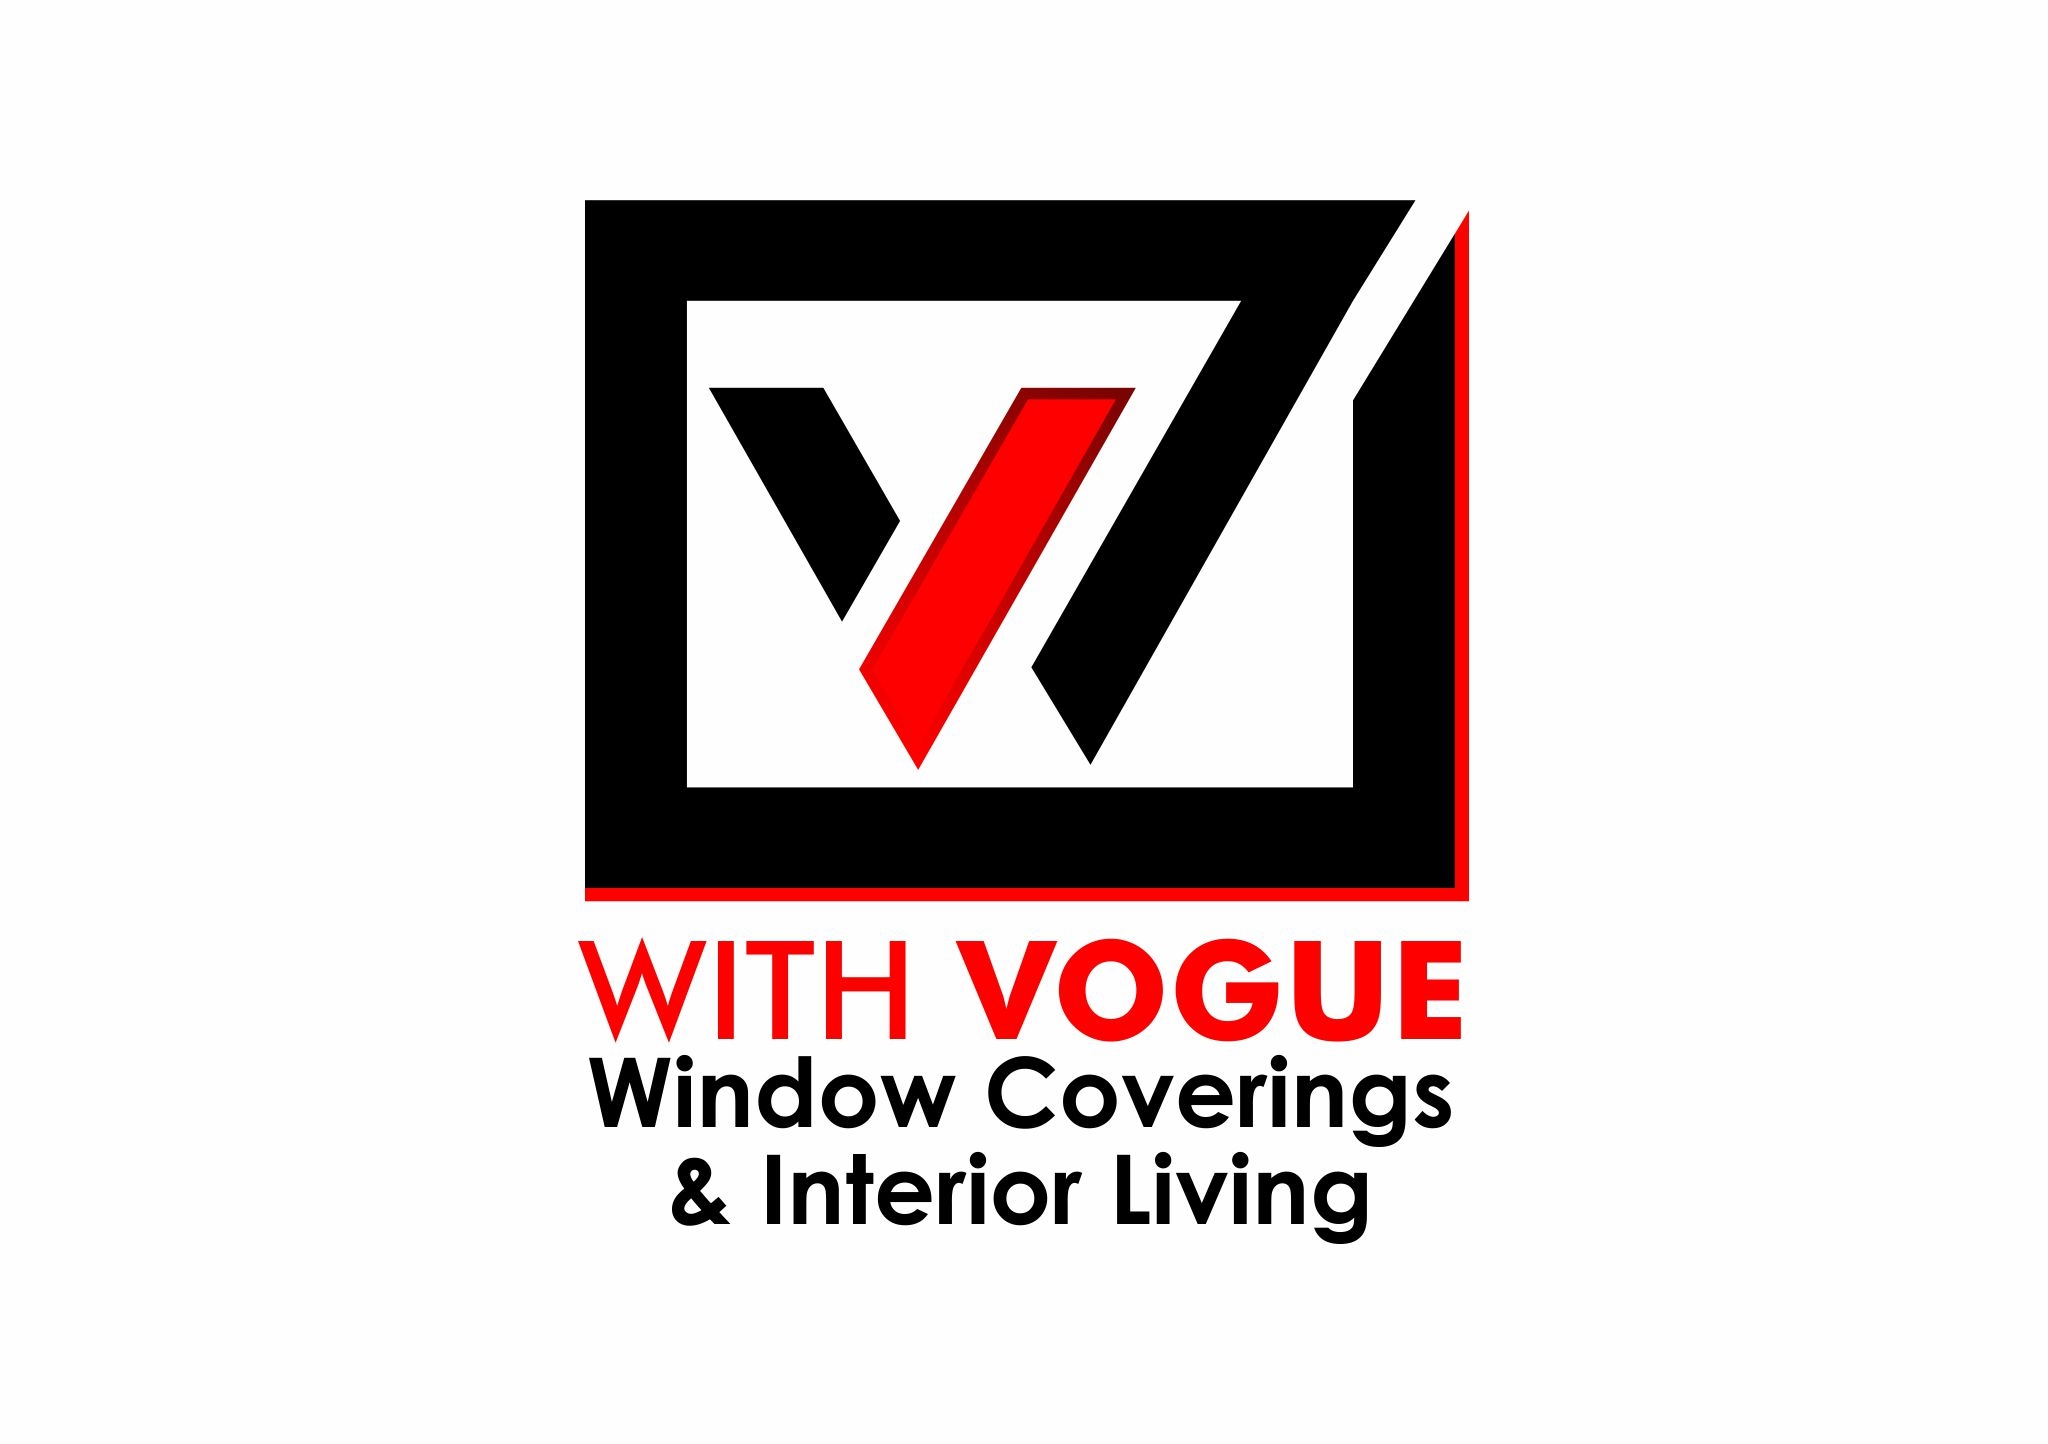 With Vogue Window Coverings & Interior Living